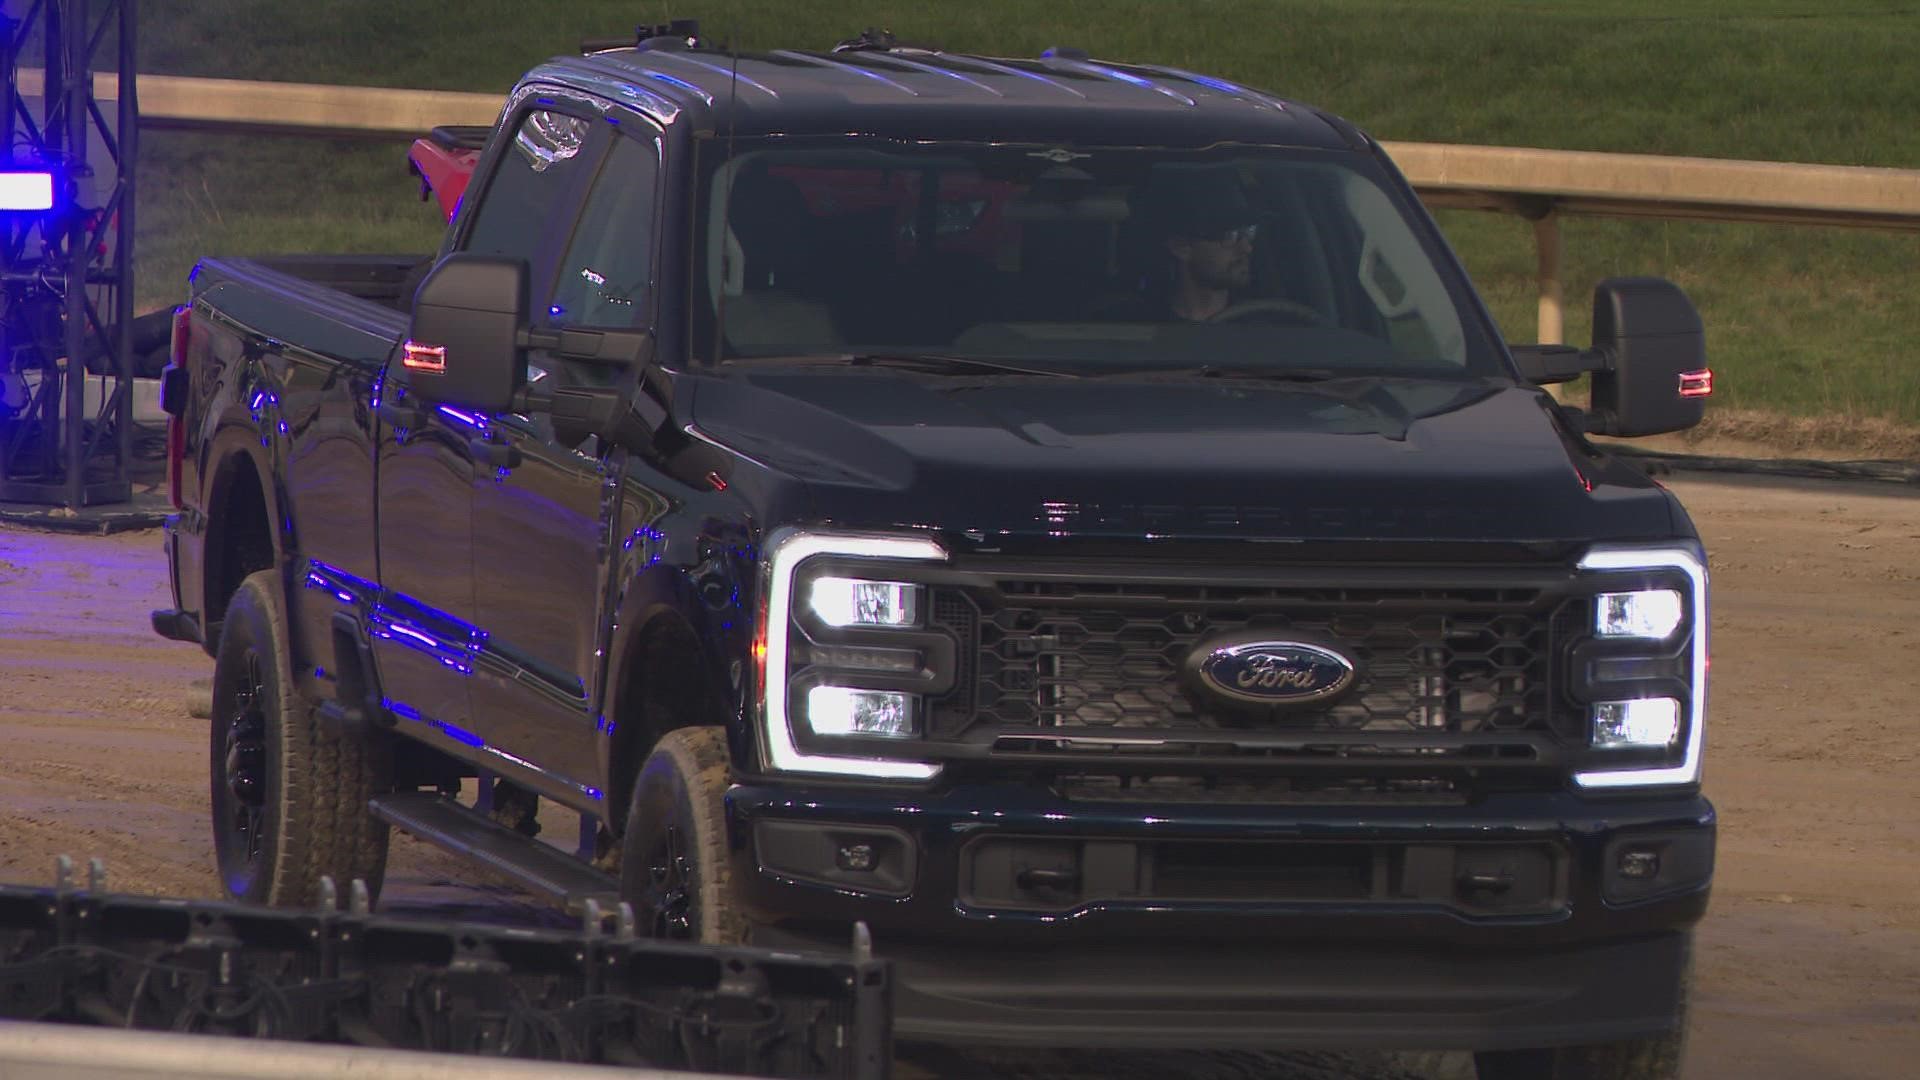 With this new truck still comes some hurdles. Thousands of Ford trucks sit across Louisville, unable to be sold due to supply chain issues.